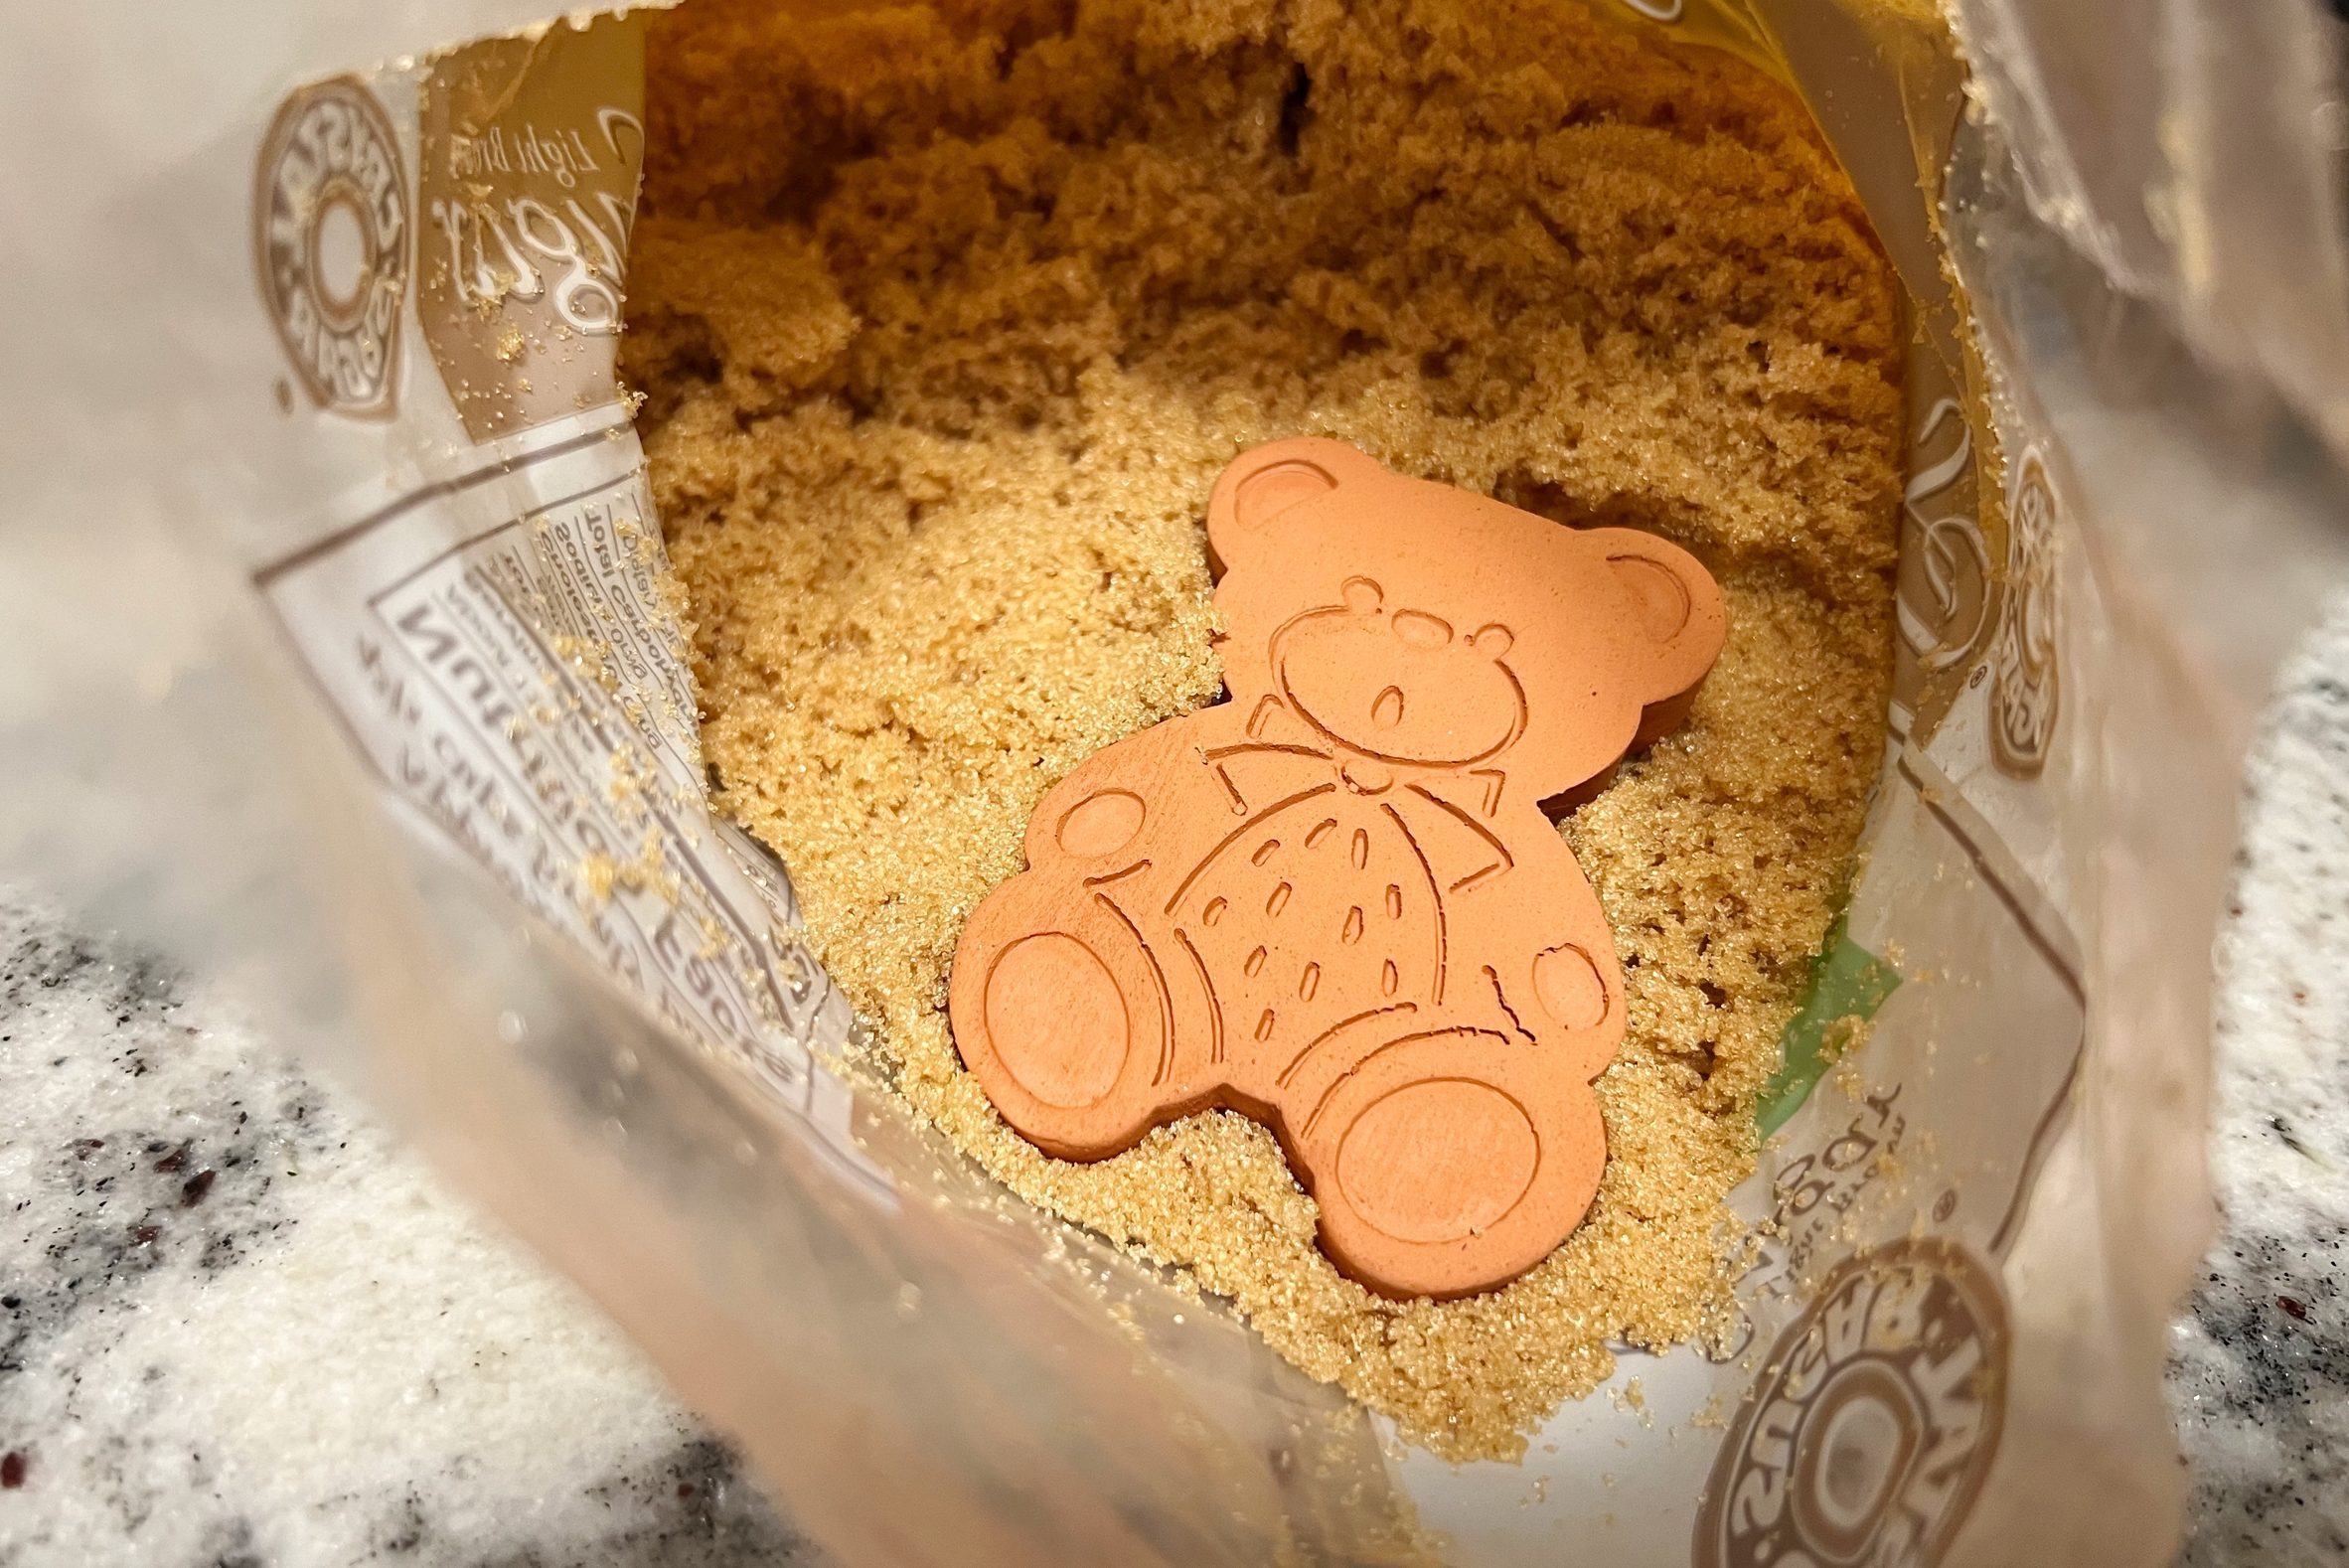 The Beary Awesome Cookie & Brown Sugar Saver